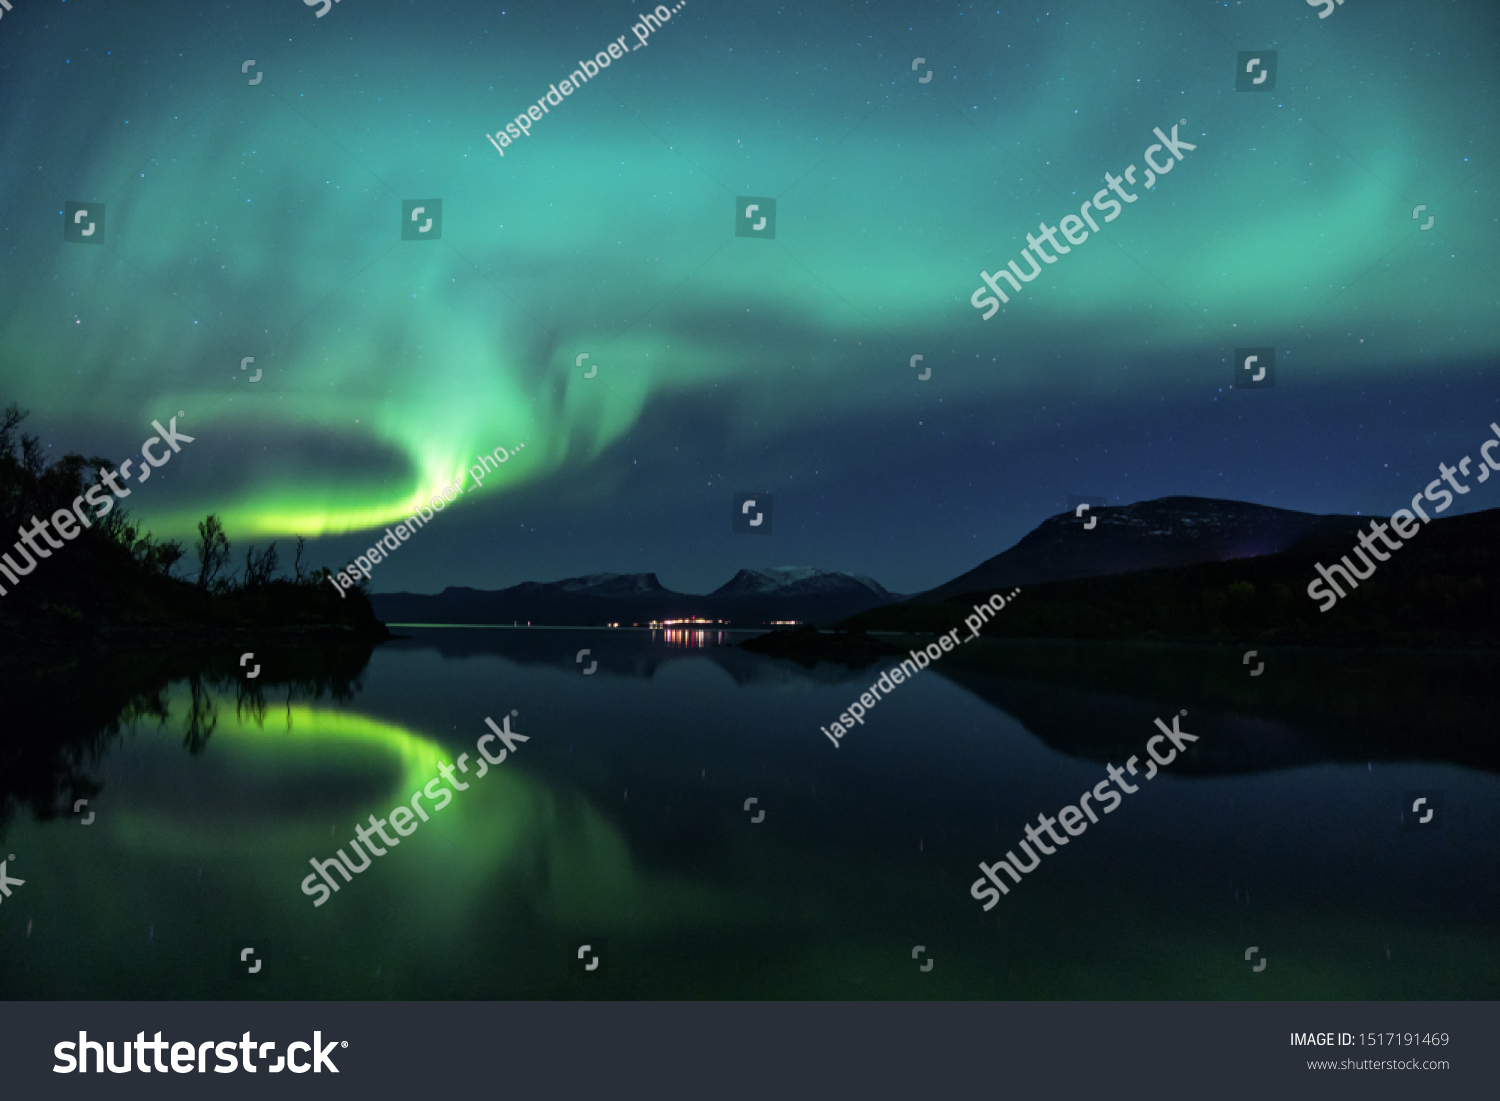 Northern Lights over Abisko National Park in Swedish Lapland. One of the best place to see the Aurora Borealis. Lapporten is also visible in the picture, one of the main symbols of Lapland #1517191469